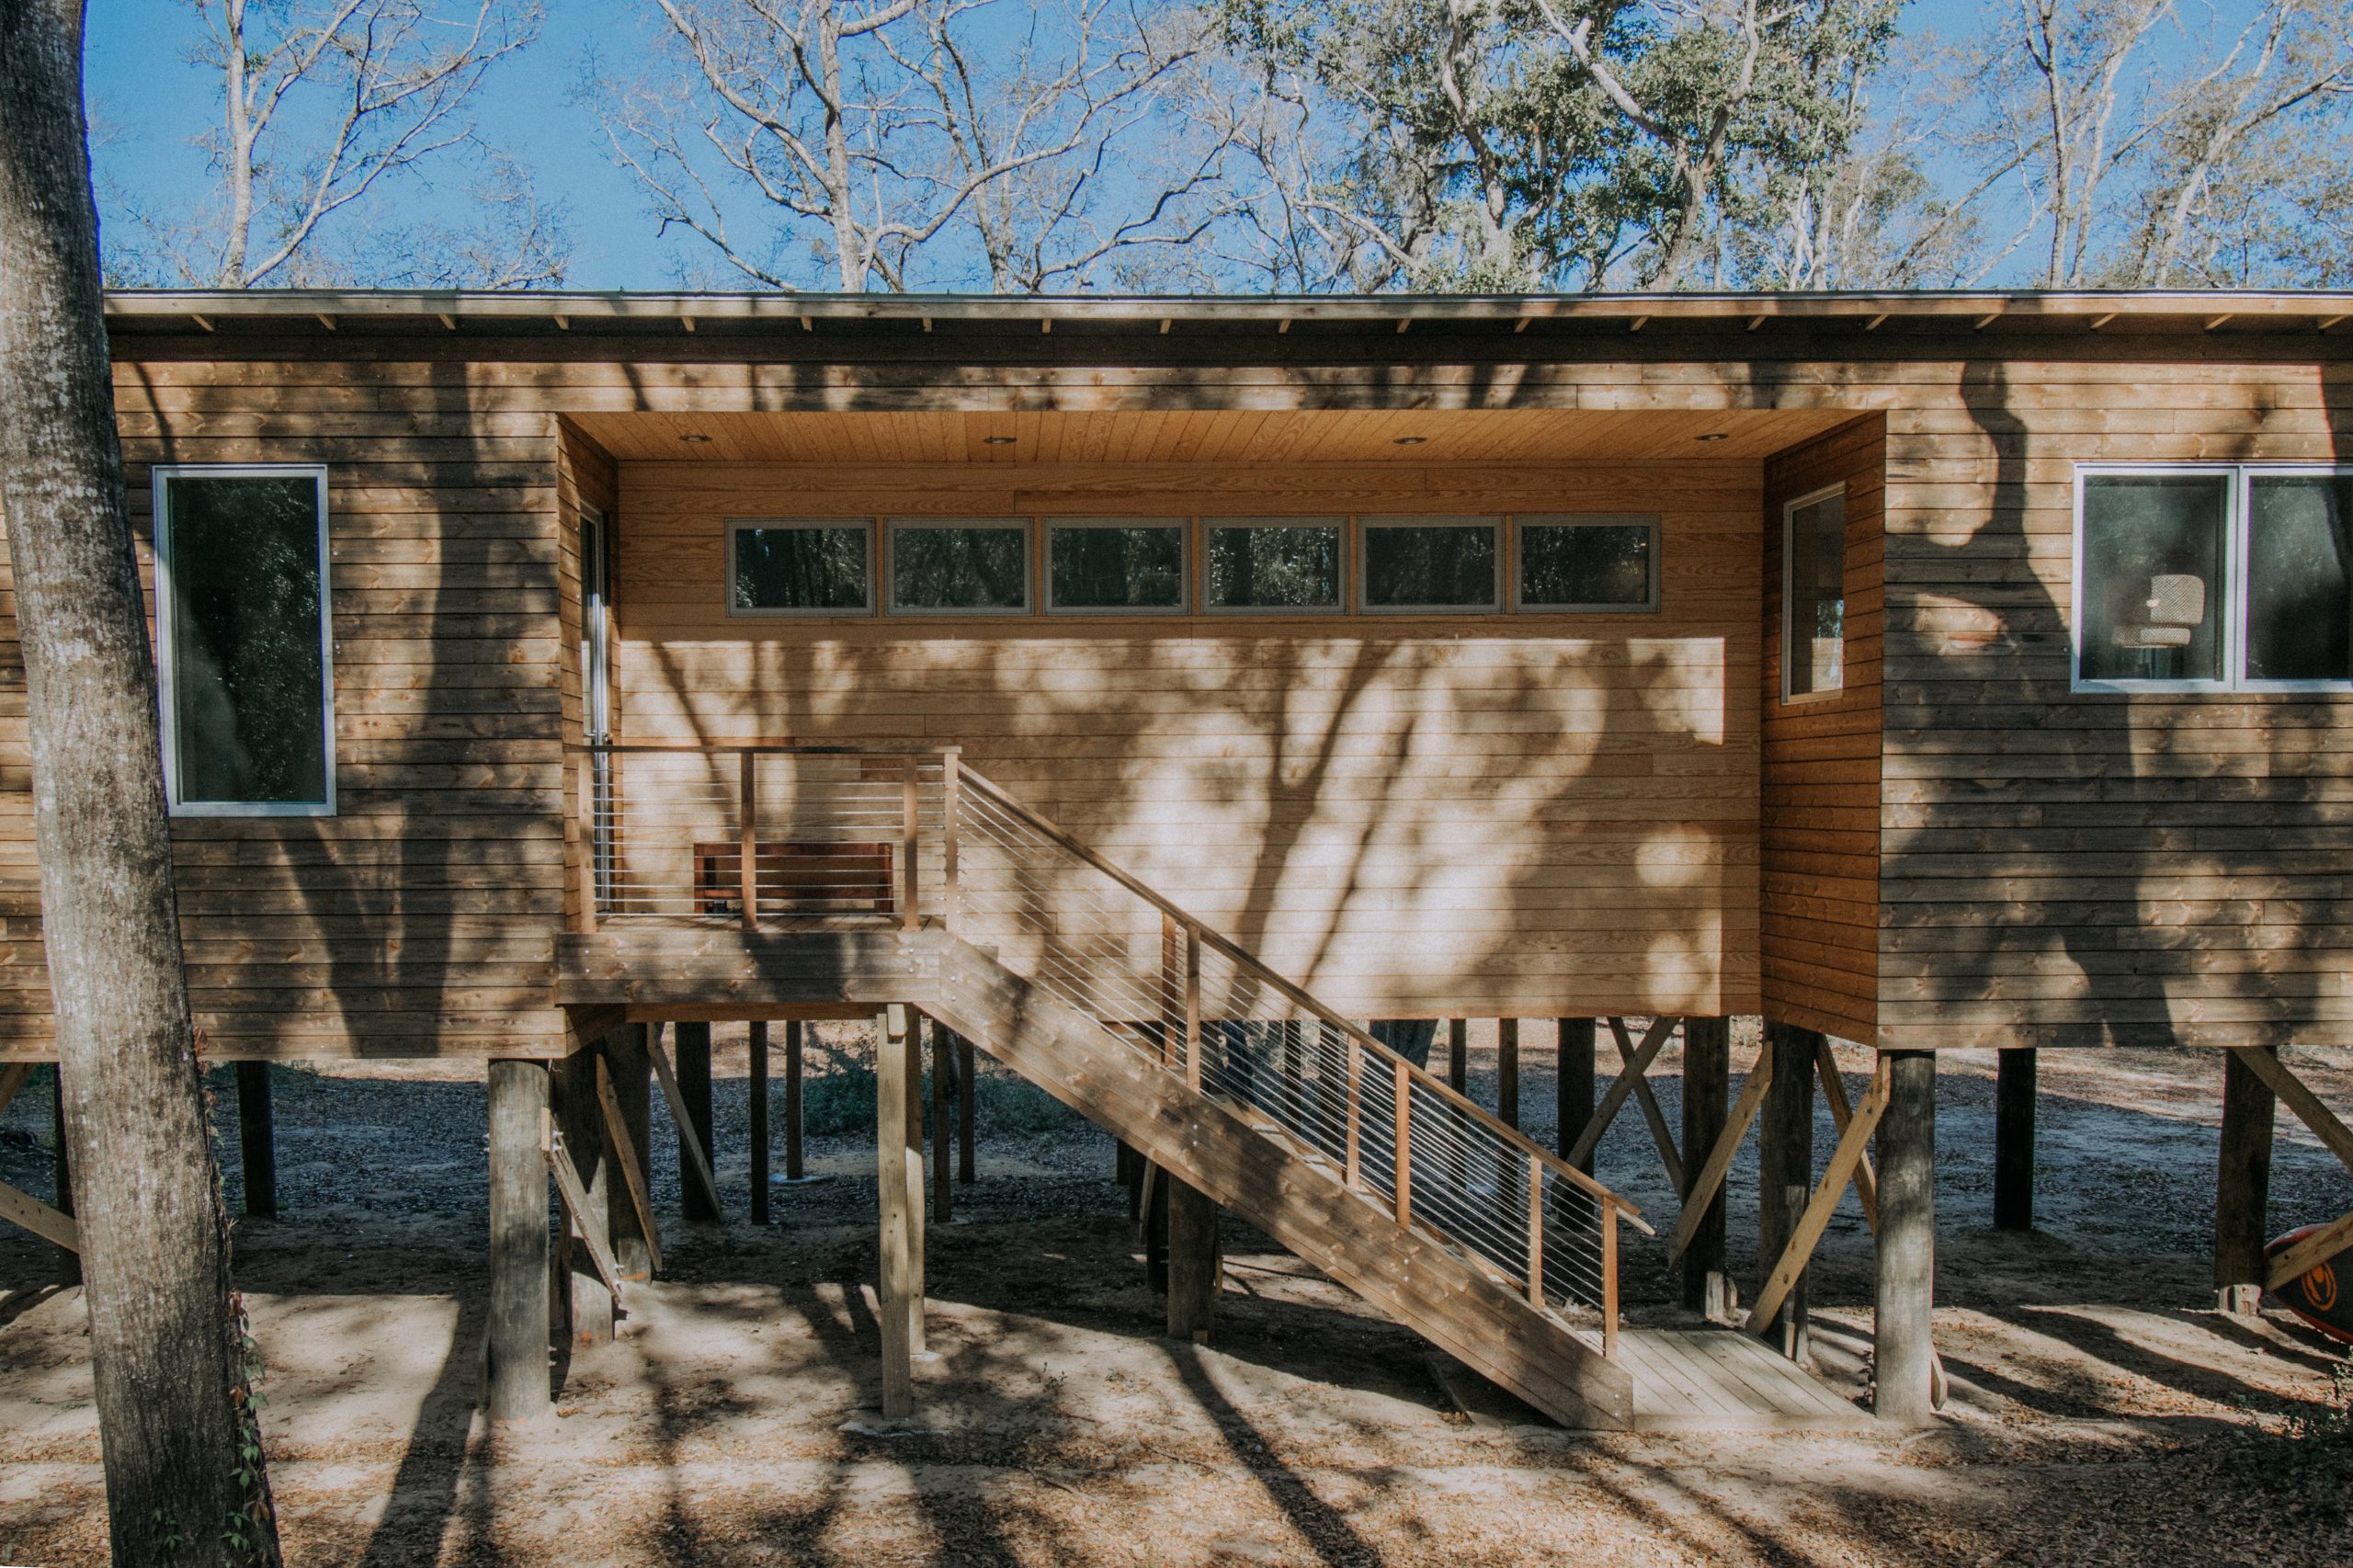 Closer view of the Bohicket House family residence in Johns Island, South Carolina that features Kebony Modified Wood Character Cladding and is surrounded by a wooded area on a sunny day